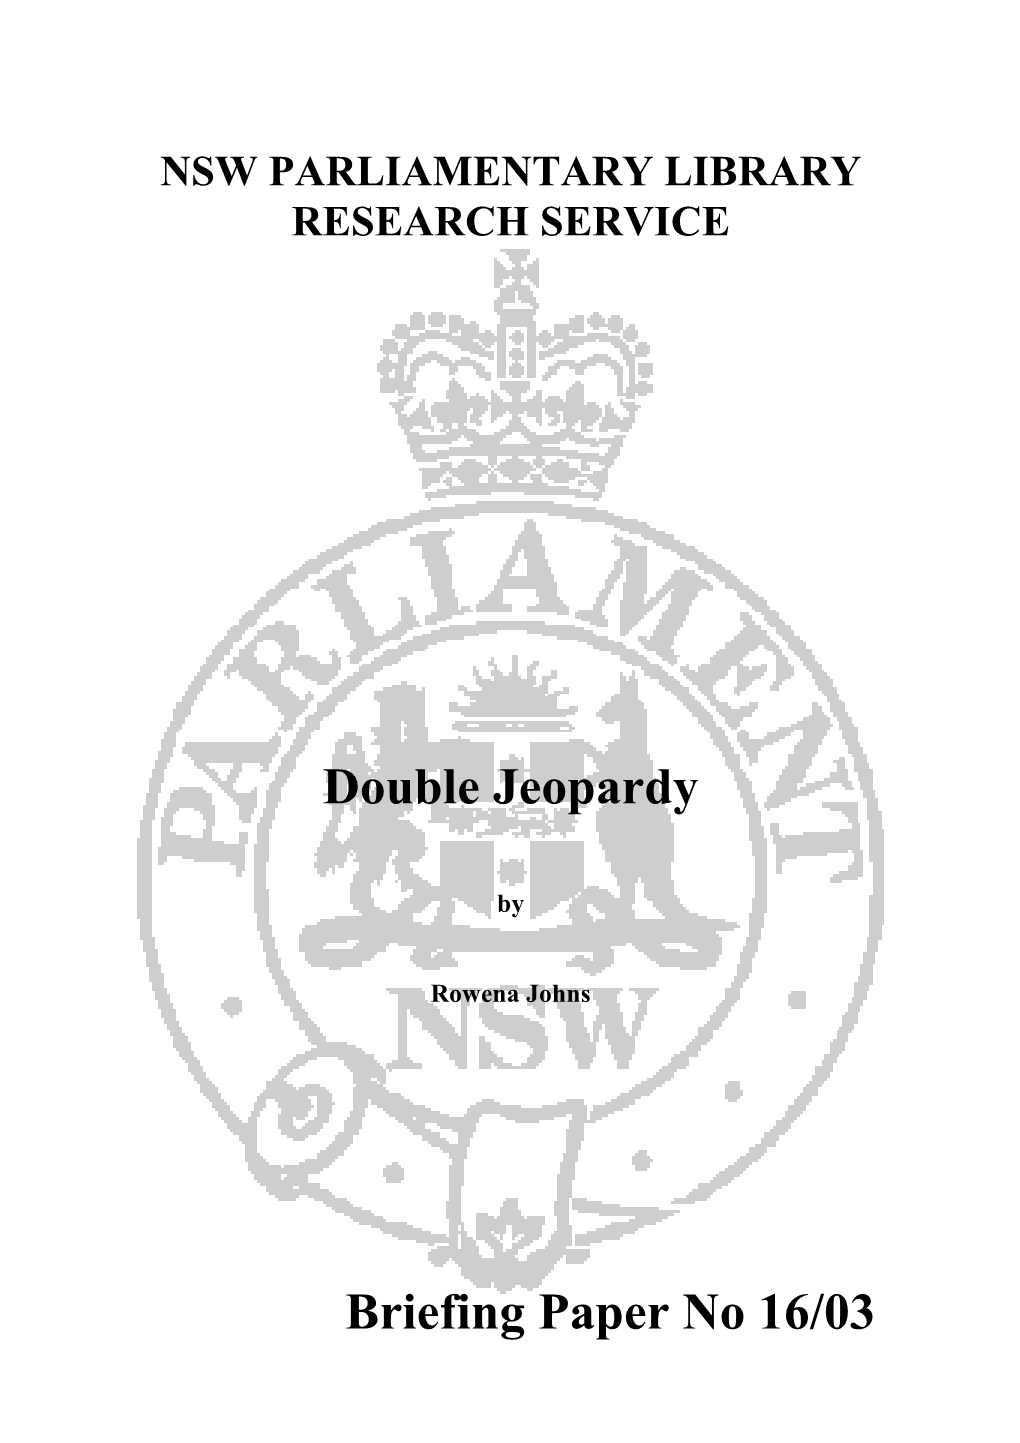 Double Jeopardy Briefing Paper No 16/03